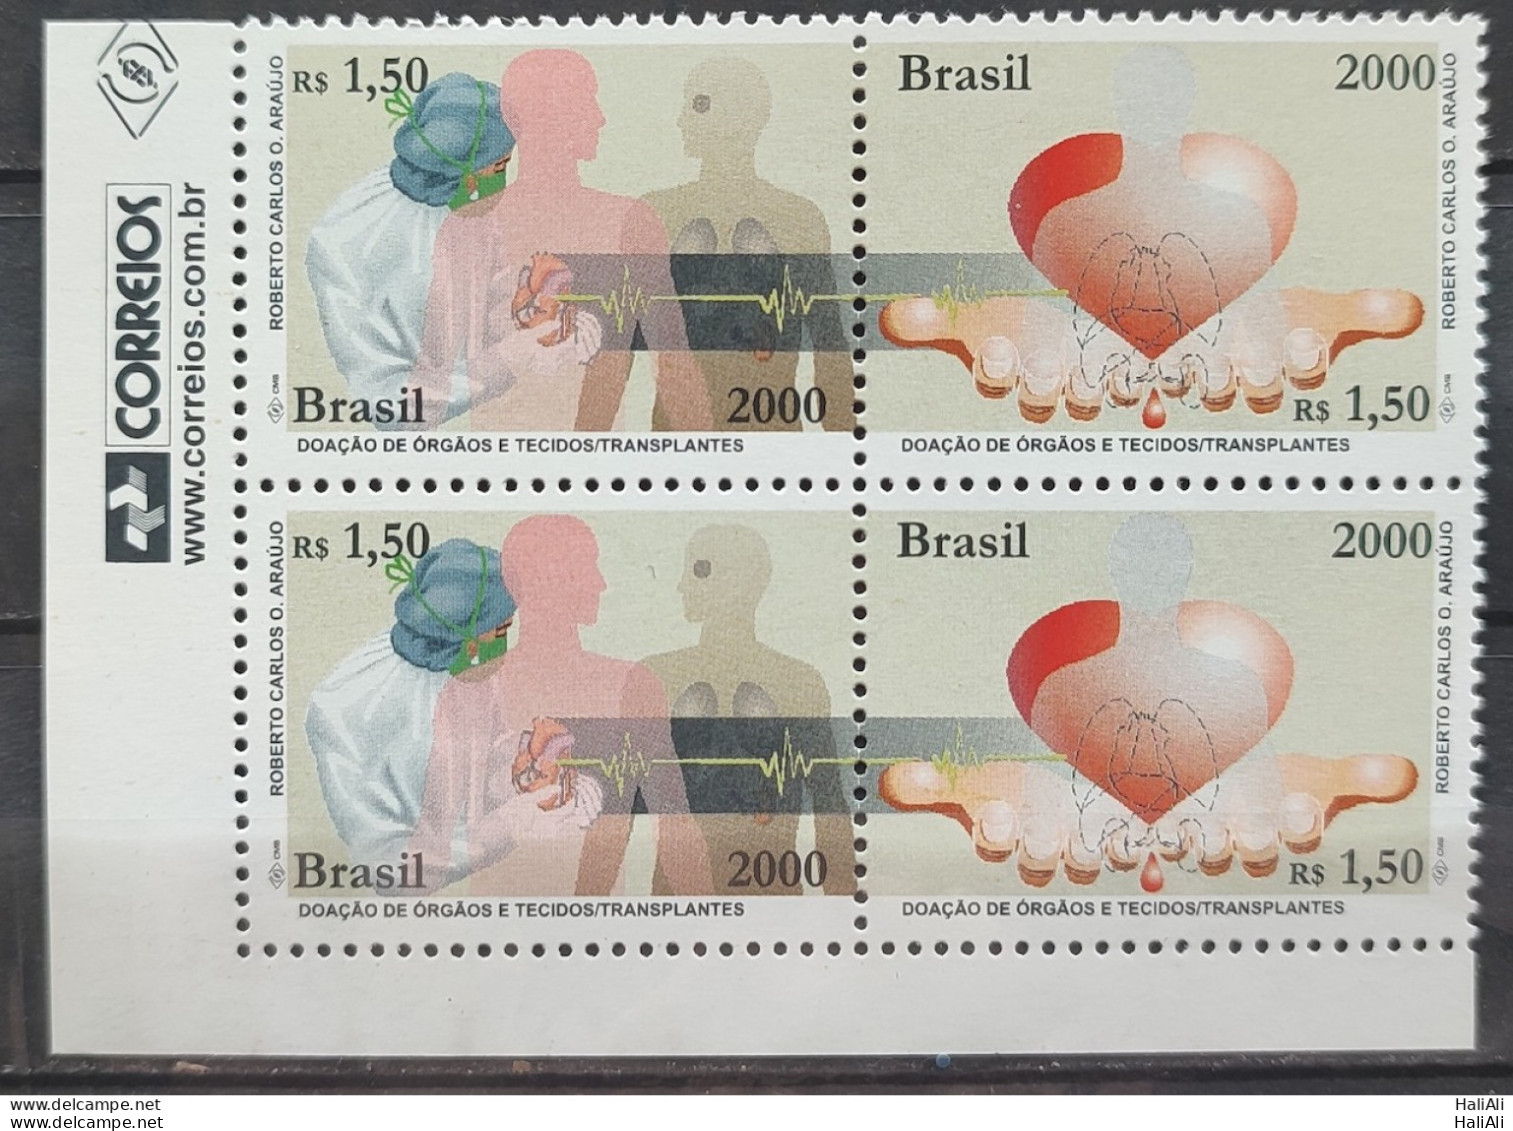 C 2341 Brazil Stamp Donation Of Organ And Tissues Science Health 2000 Block Of 4 Vignette Post Office - Neufs